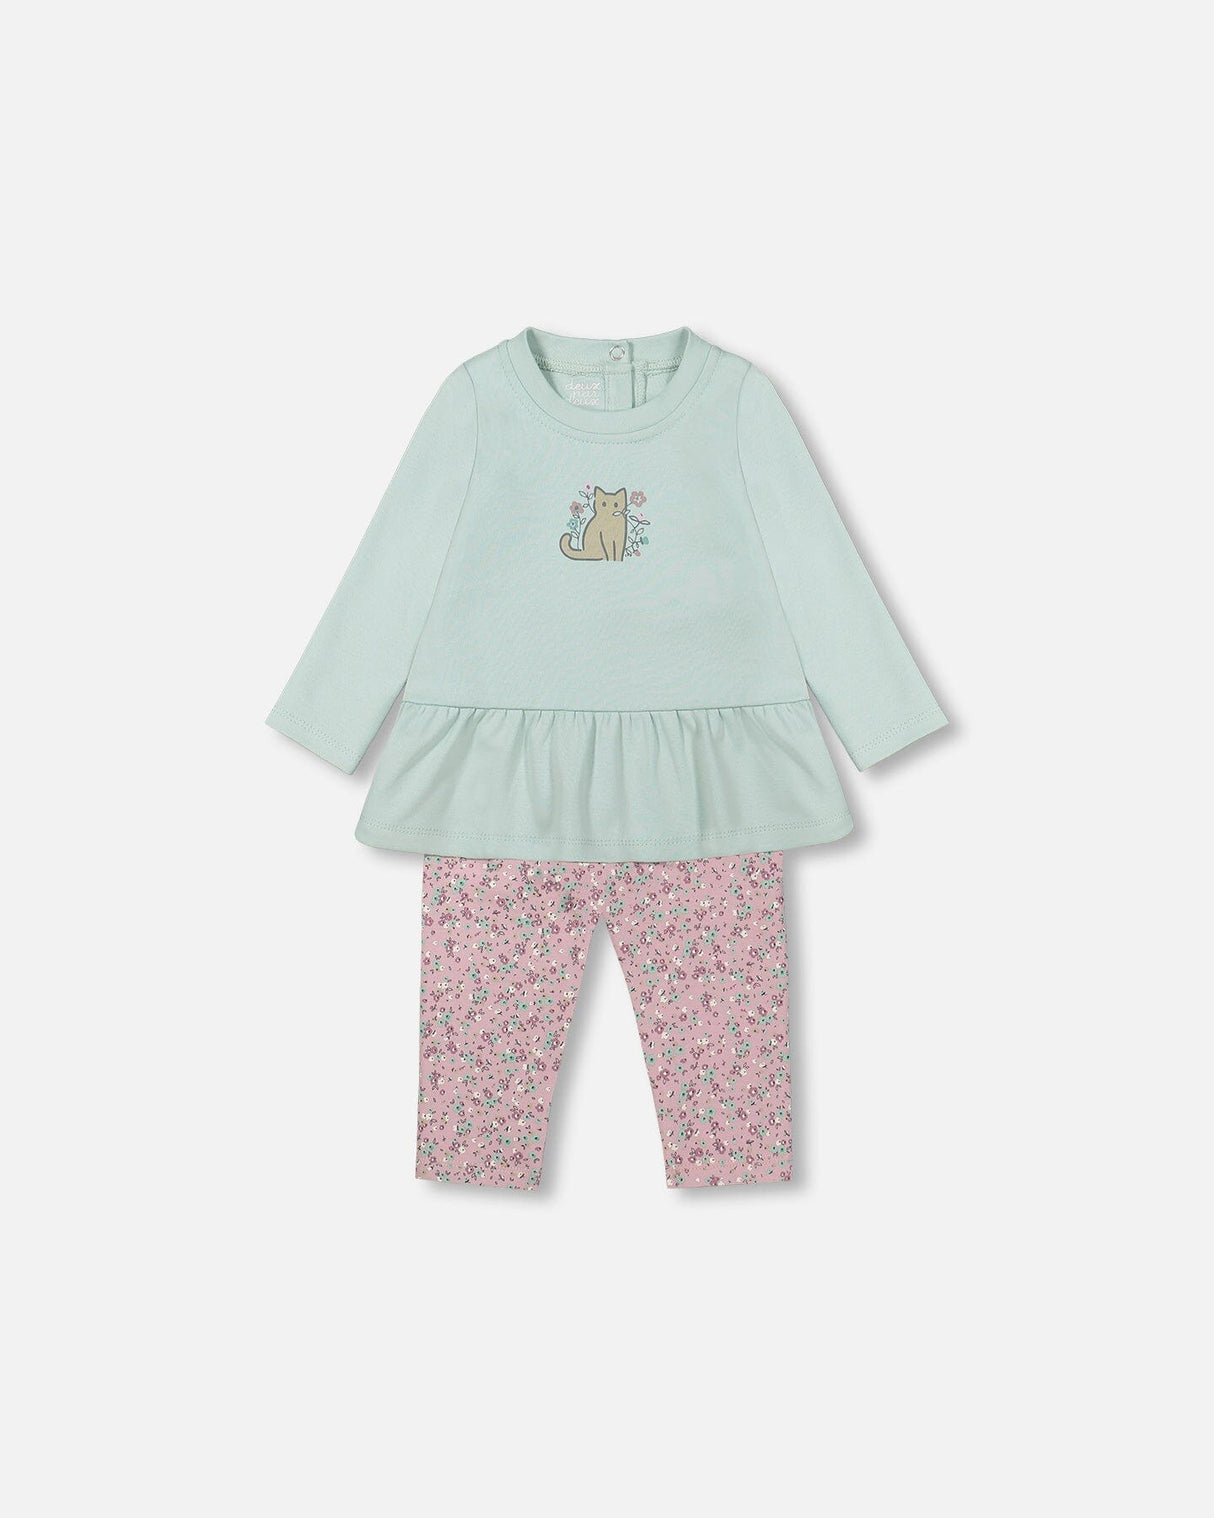 Organic Cotton Tunic And Printed Legging Set Mint And Mauve Little Flower Print-0